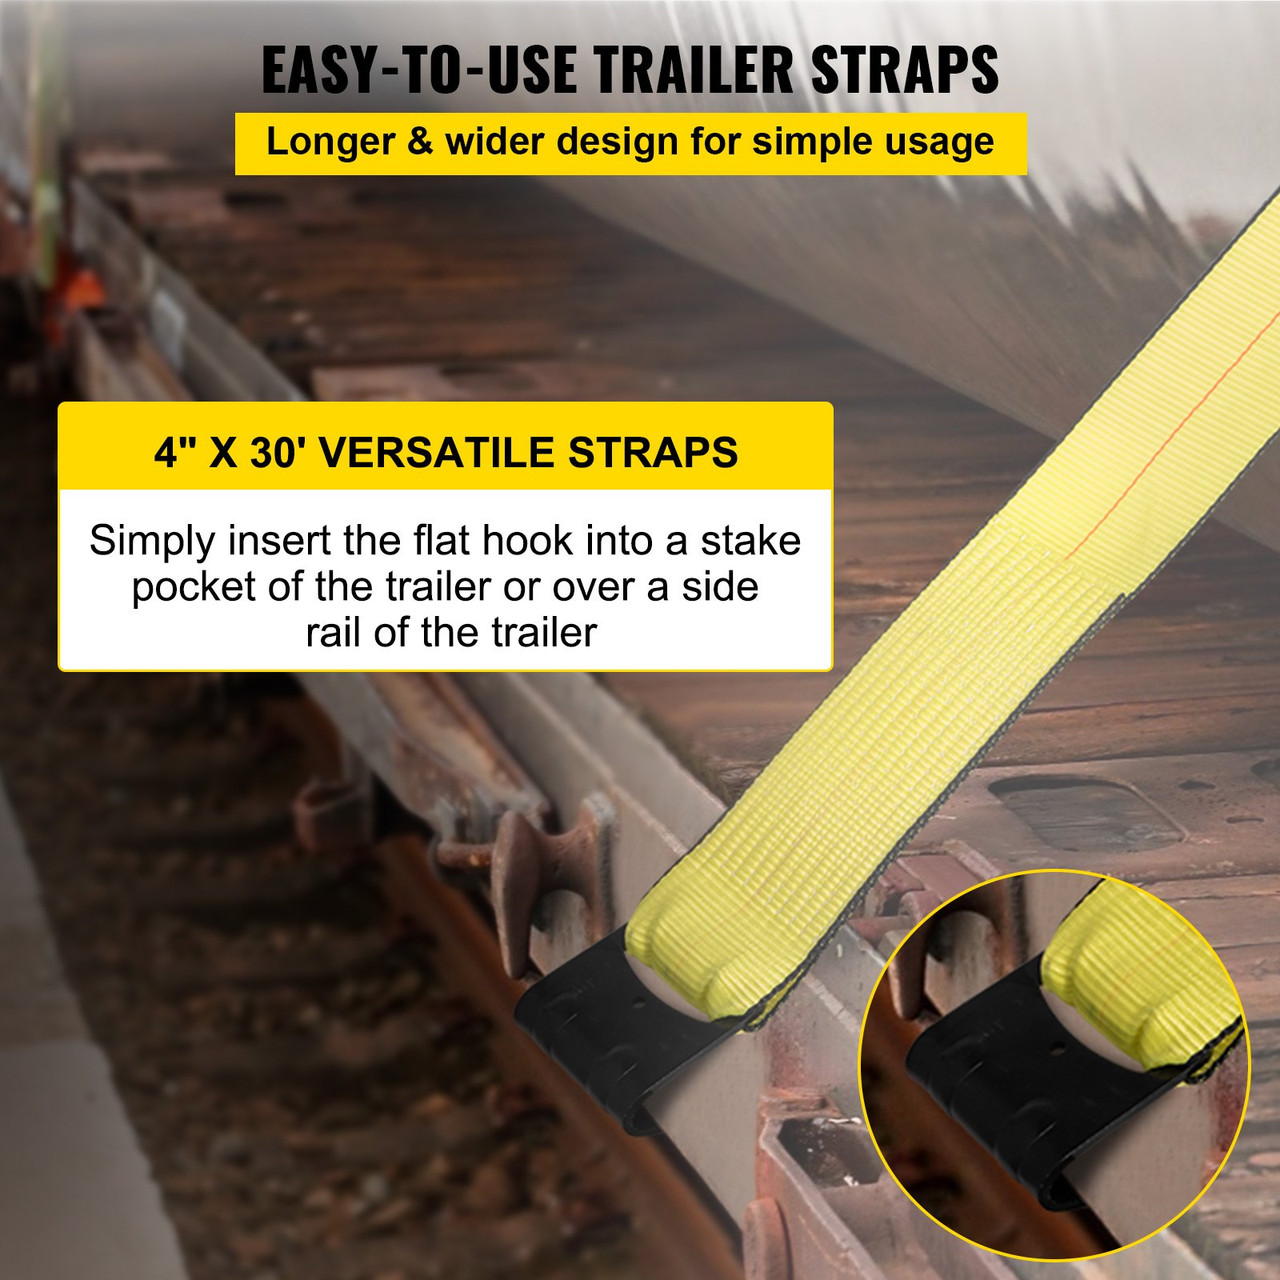 Truck Straps 4" x30' Flatbed Straps Tie Down 15400lbs Load Capacity Flatbed Strap Cargo Control for Flatbeds, Trucks, Trailers, Farms, Rescues, Tree Saver, Yellow (10-Pack)